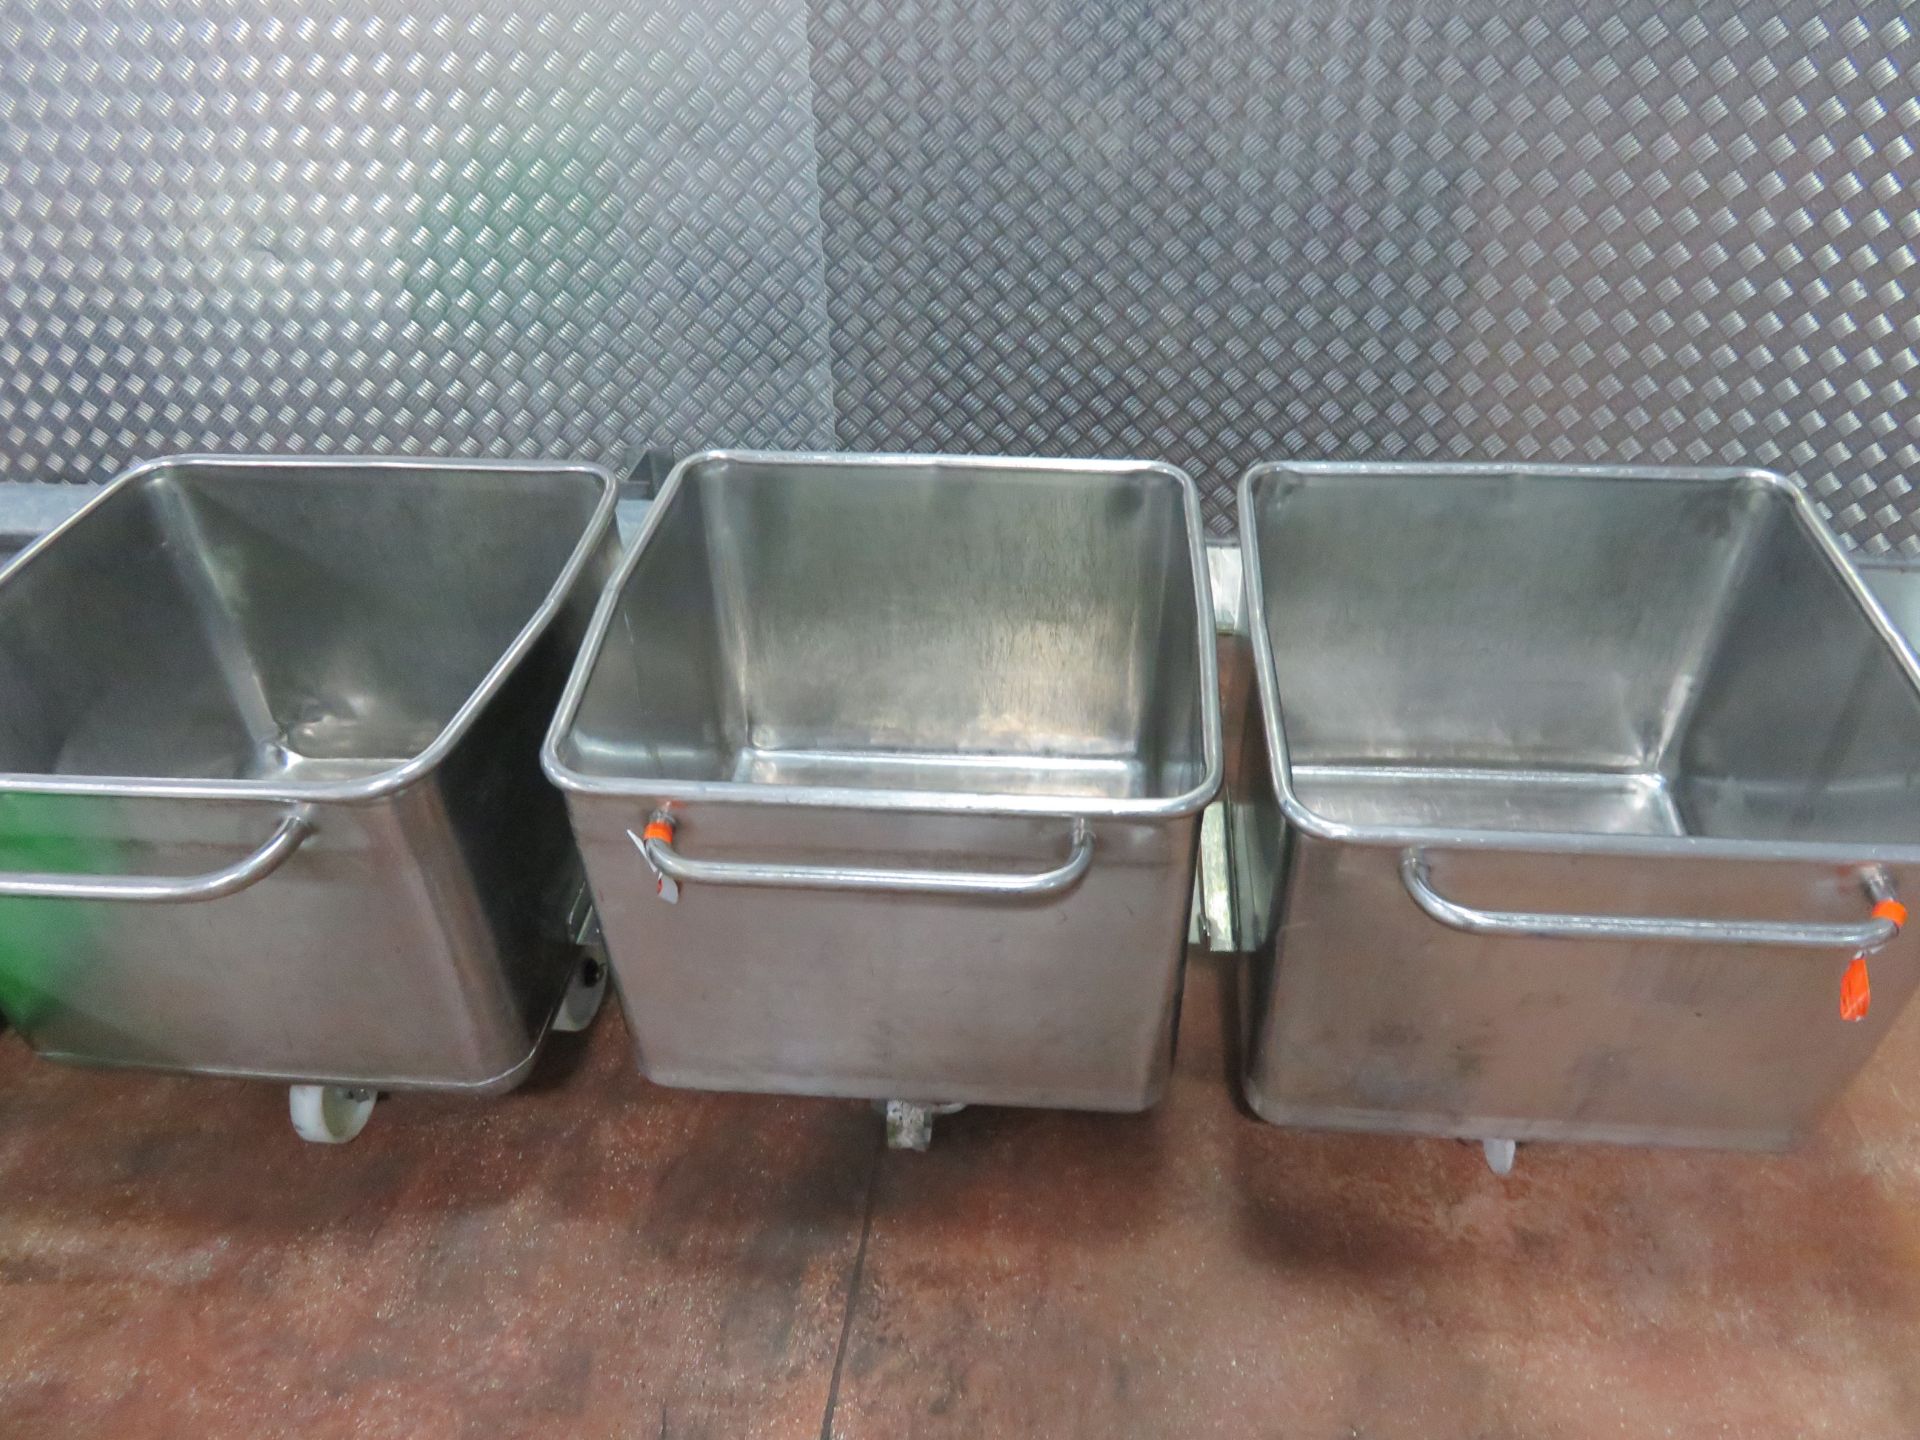 3 x 200 litre S/s Tote Bins. Lift Out £10